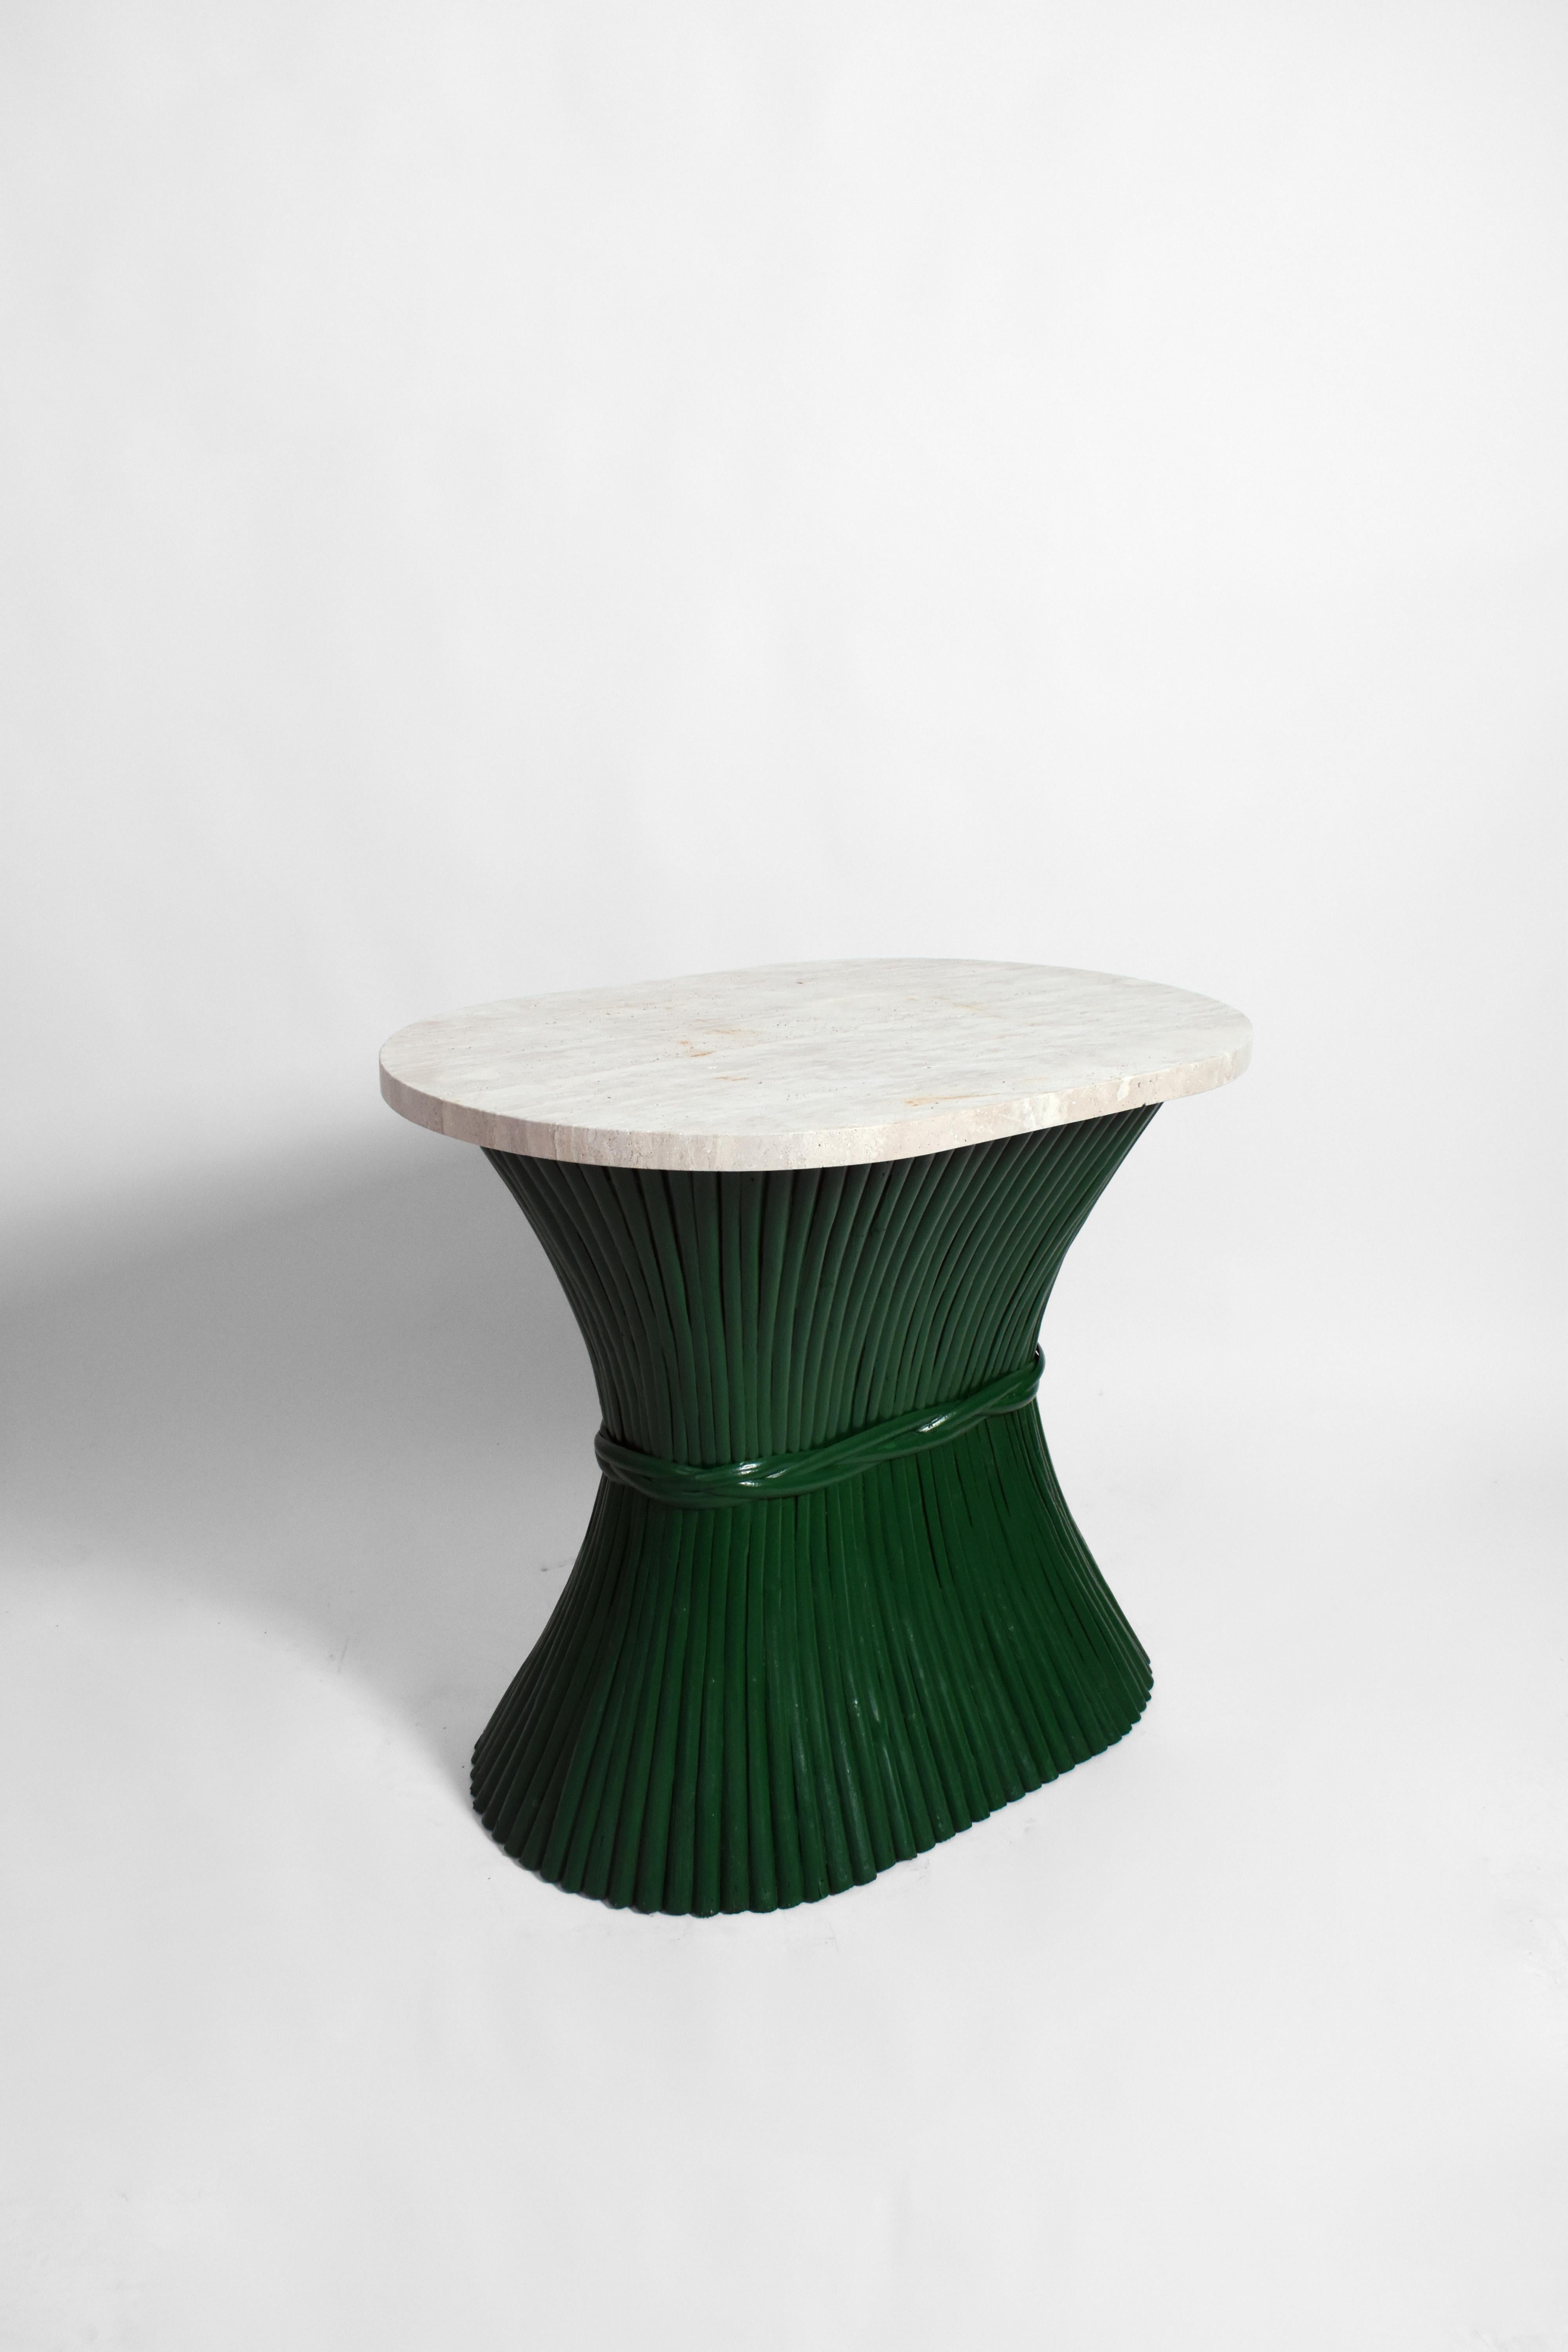 Rattan green painted console table. USA, 1970s.